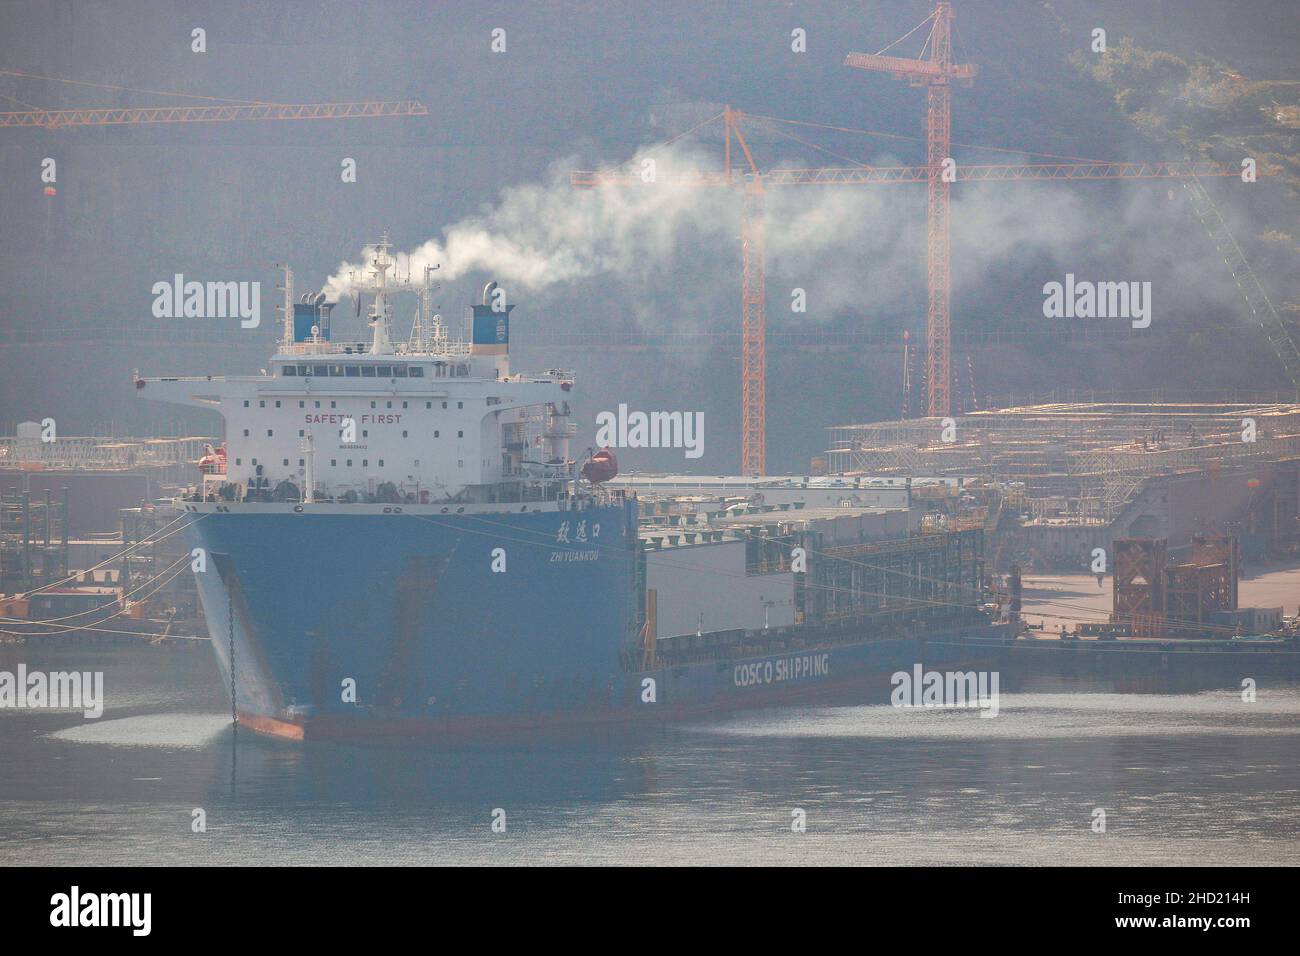 June 24, 2020-Geoje, South Korea-A View of shipbuilding yard scene at samsung heavy industry and DSME in Geoje, South Korea. Stock Photo